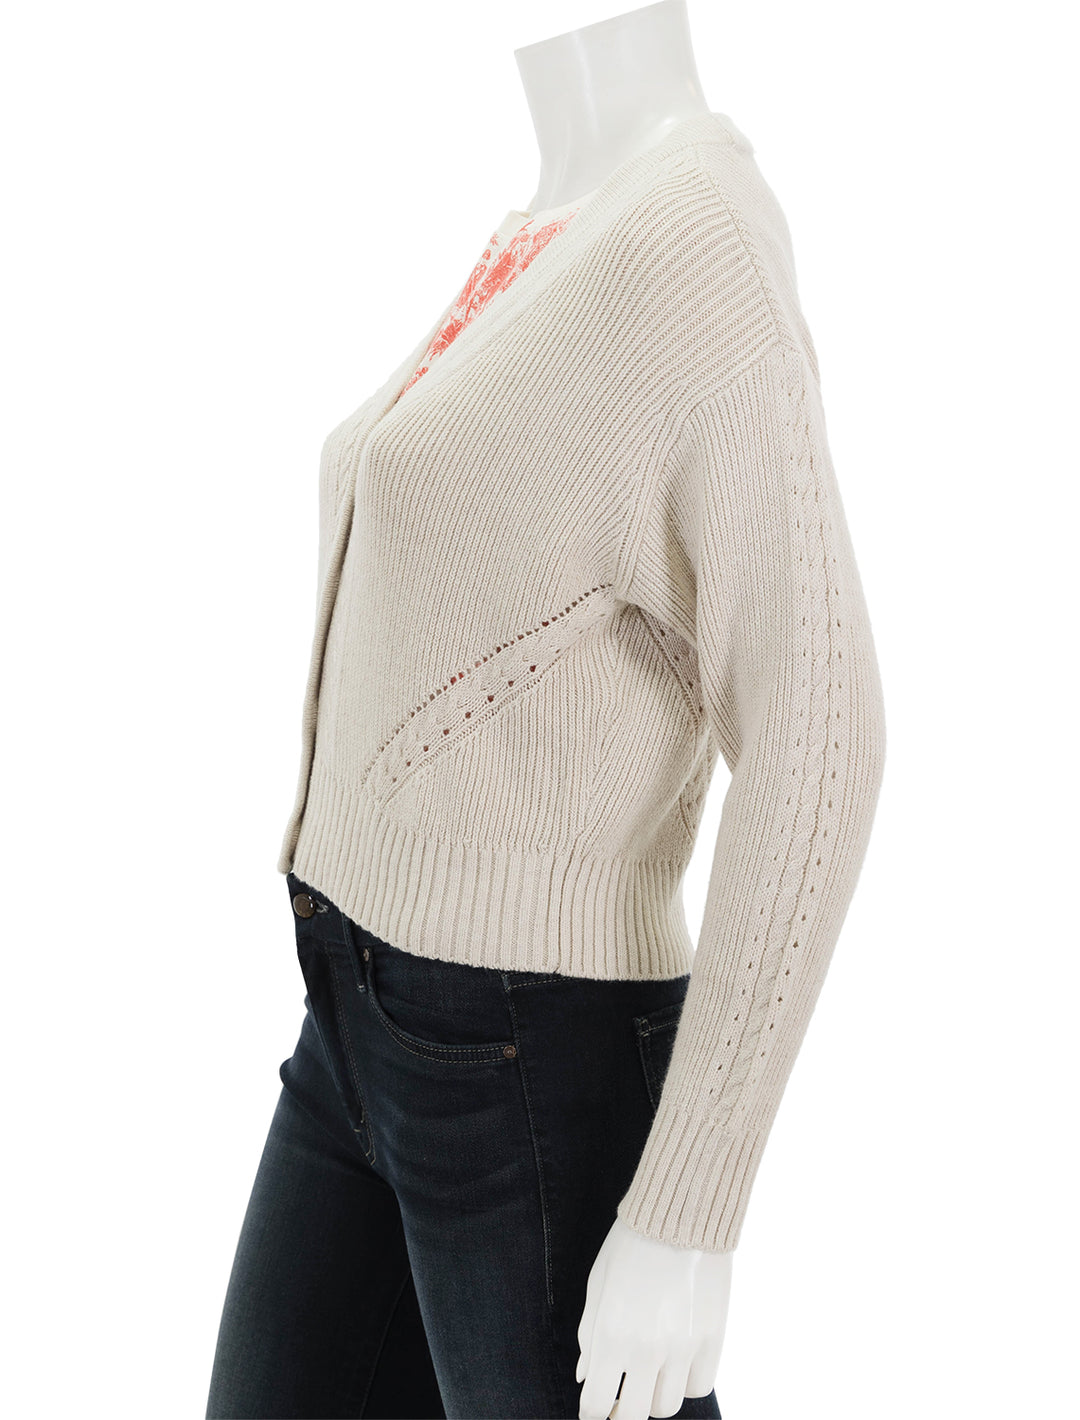 Side view of Marine Layer's robin crop cardigan in oatmeal.